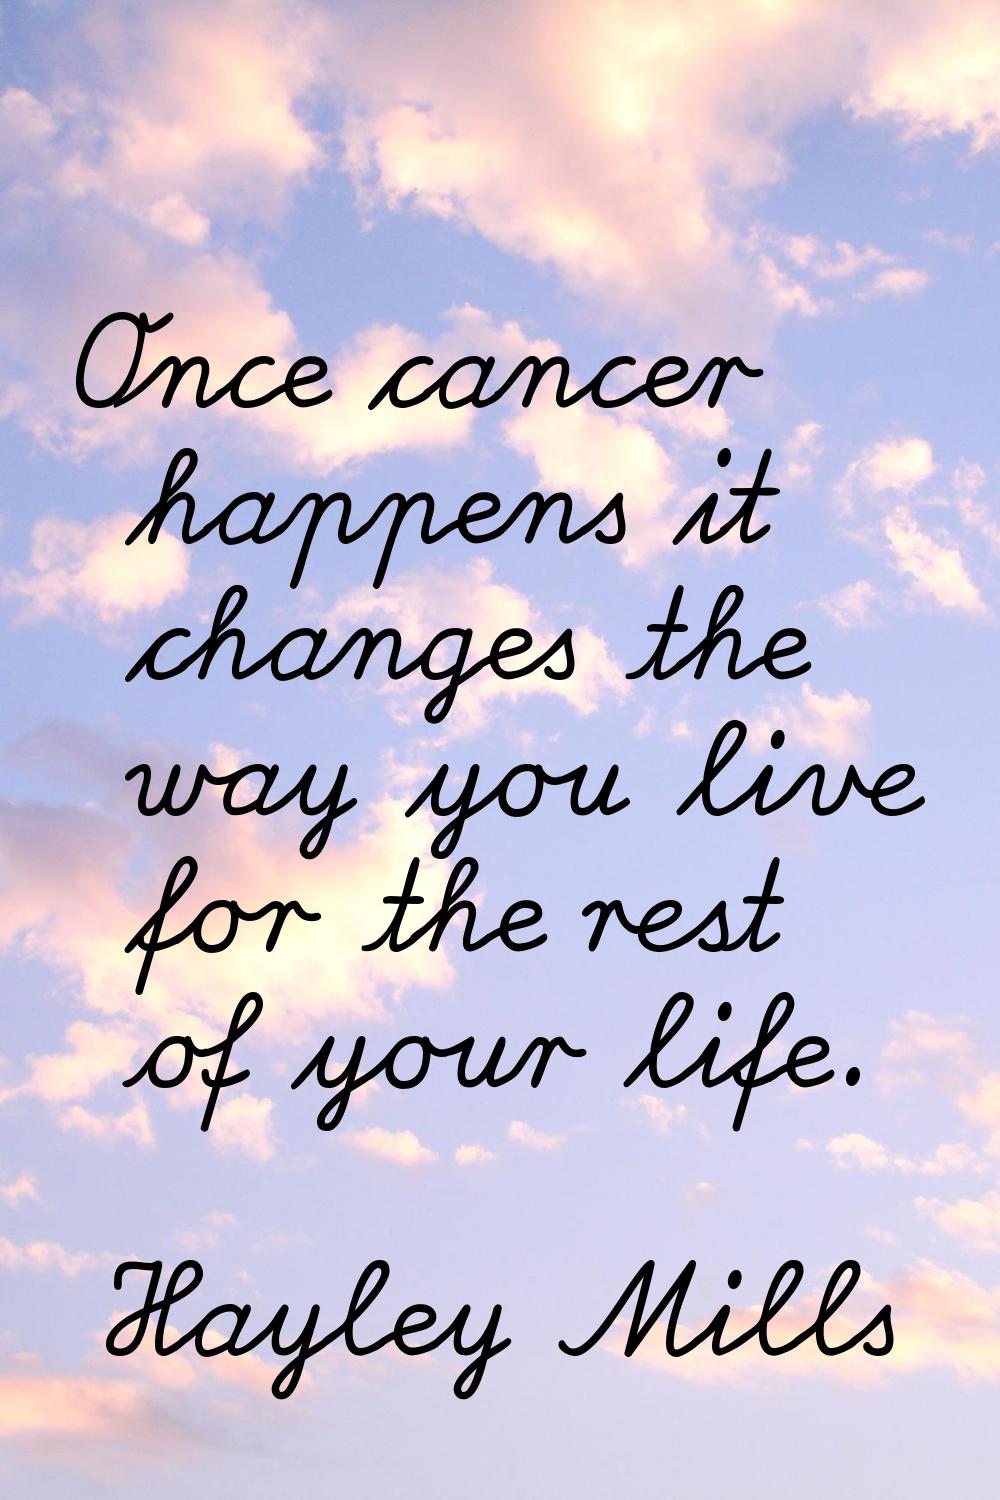 Once cancer happens it changes the way you live for the rest of your life.